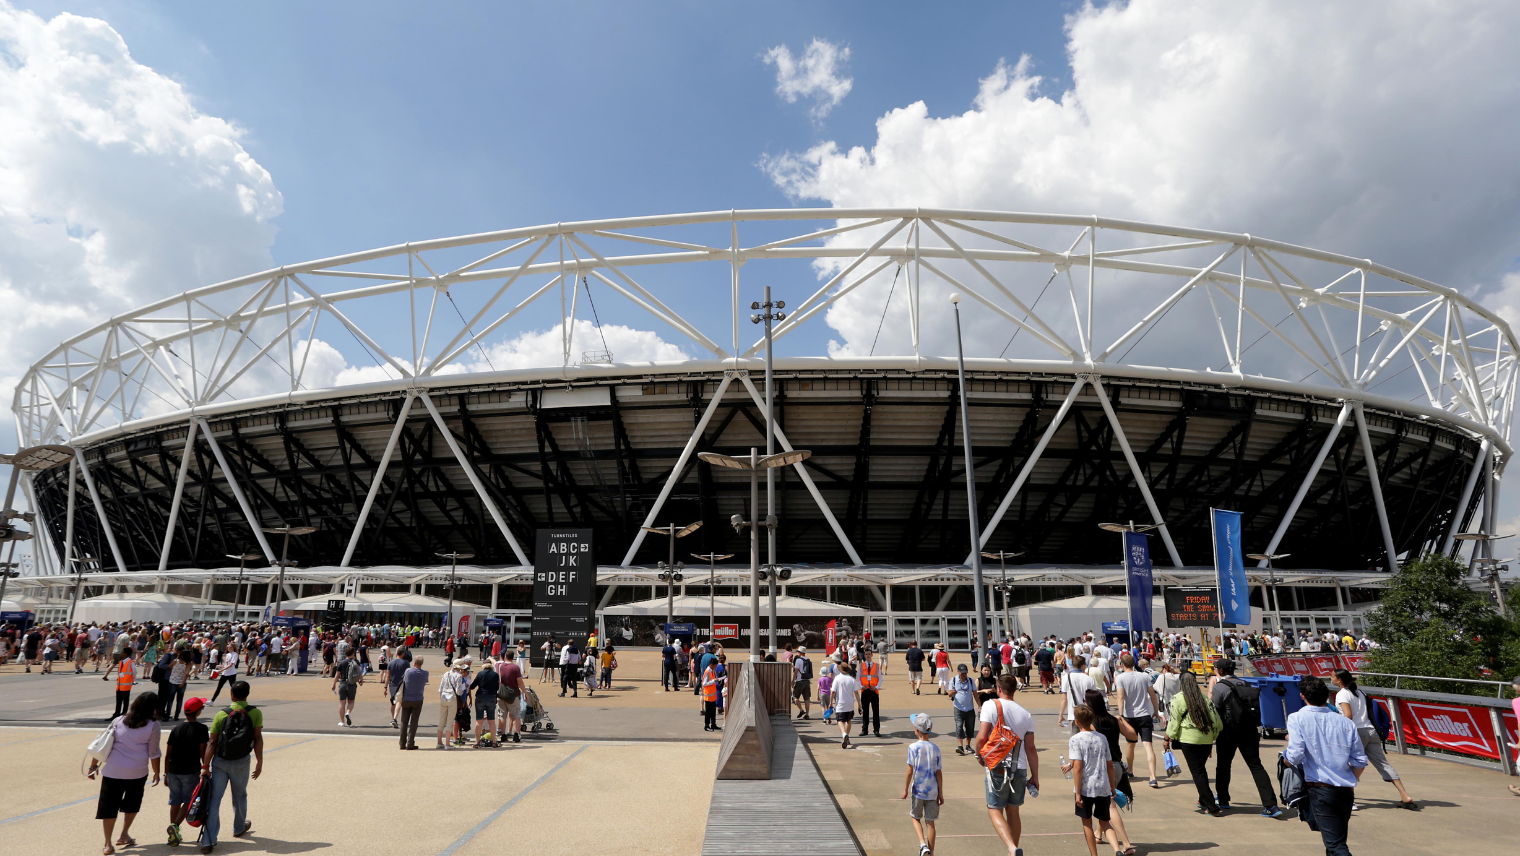 London stadium from the outside